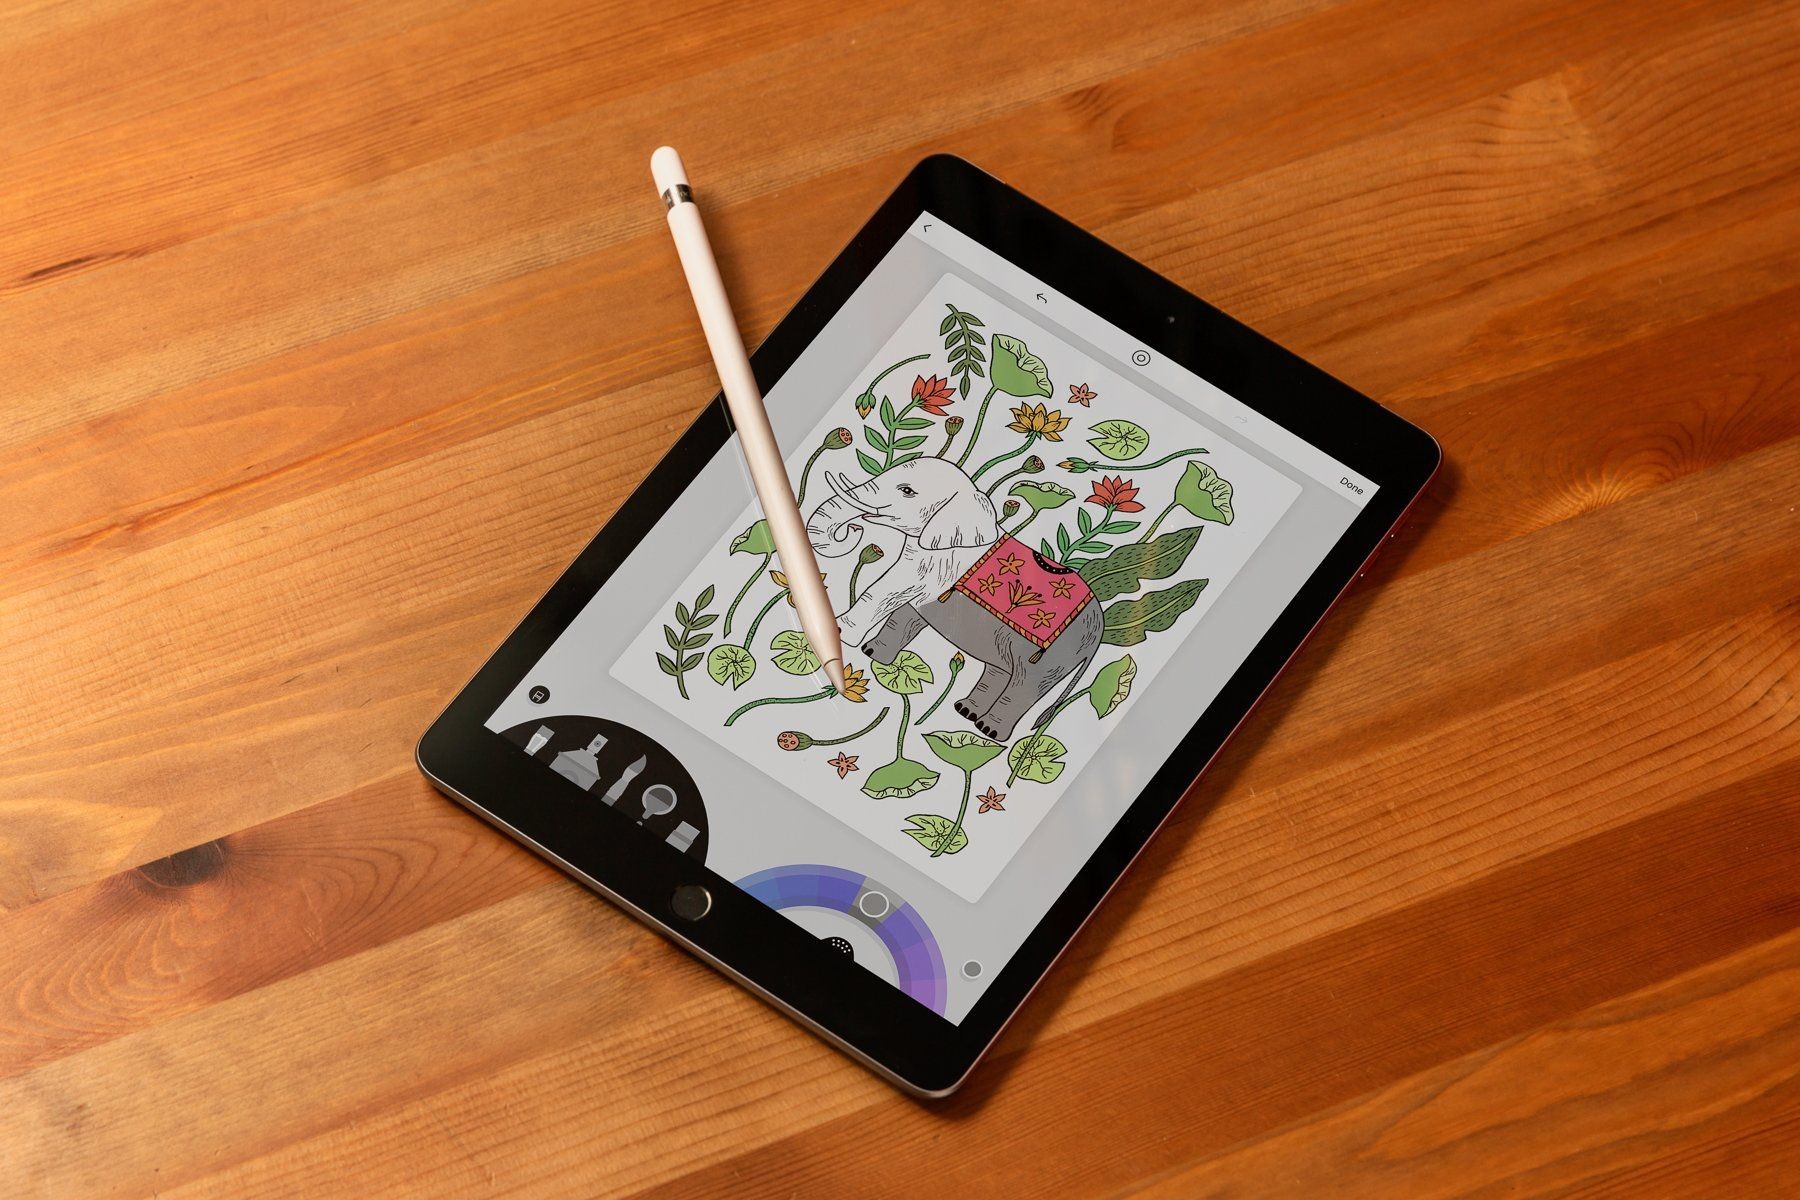 Papercraft Ipad 8 Reasons You Should Apple S Most Basic Ipad Instead Of An Ipad Pro